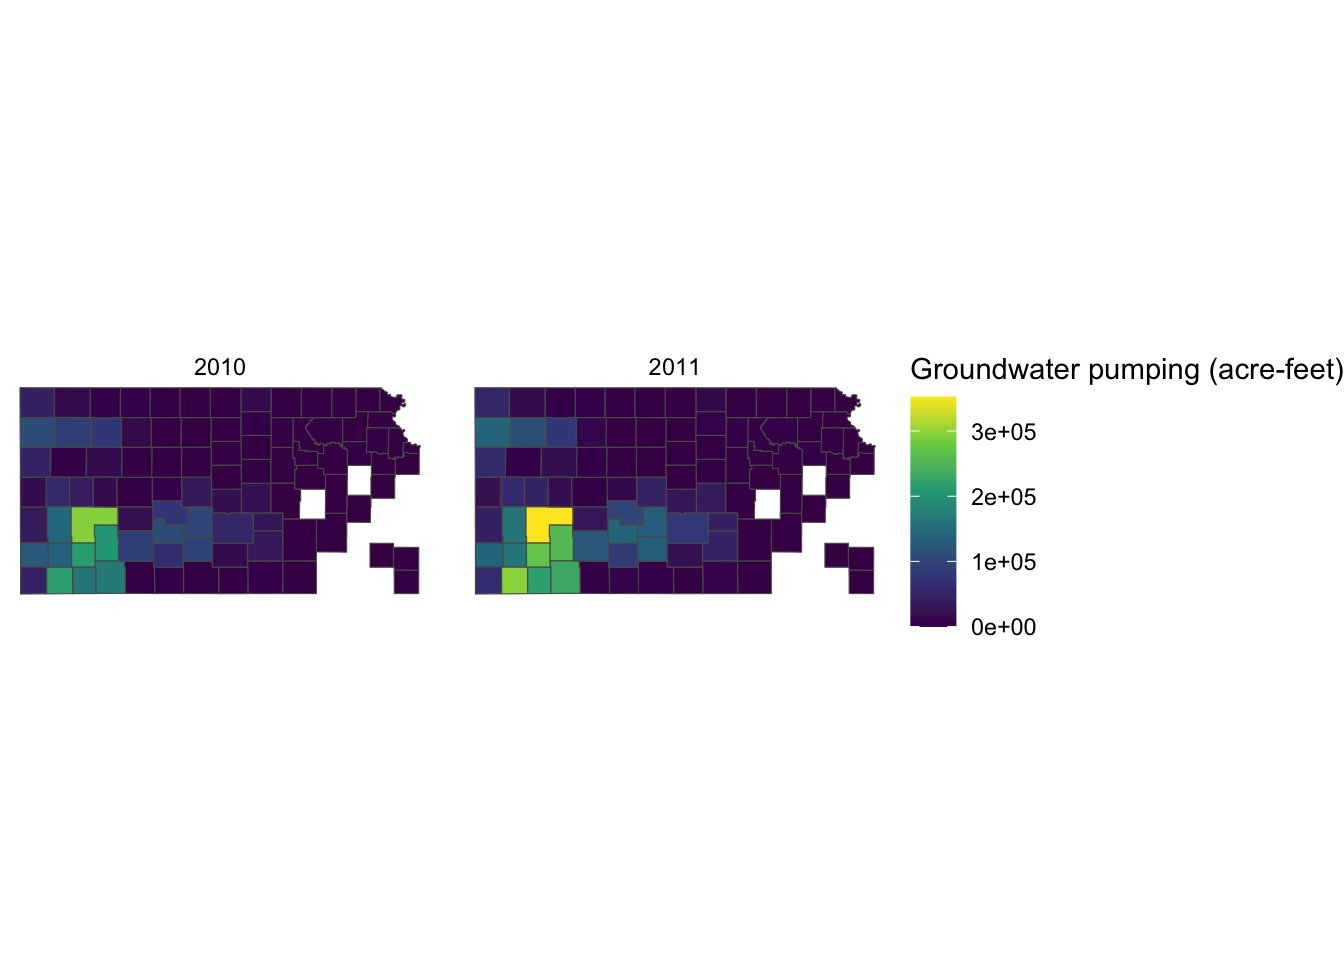 ggplot2: Elegant Graphics for Data Analysis (3e) - 11 Colour scales and  legends